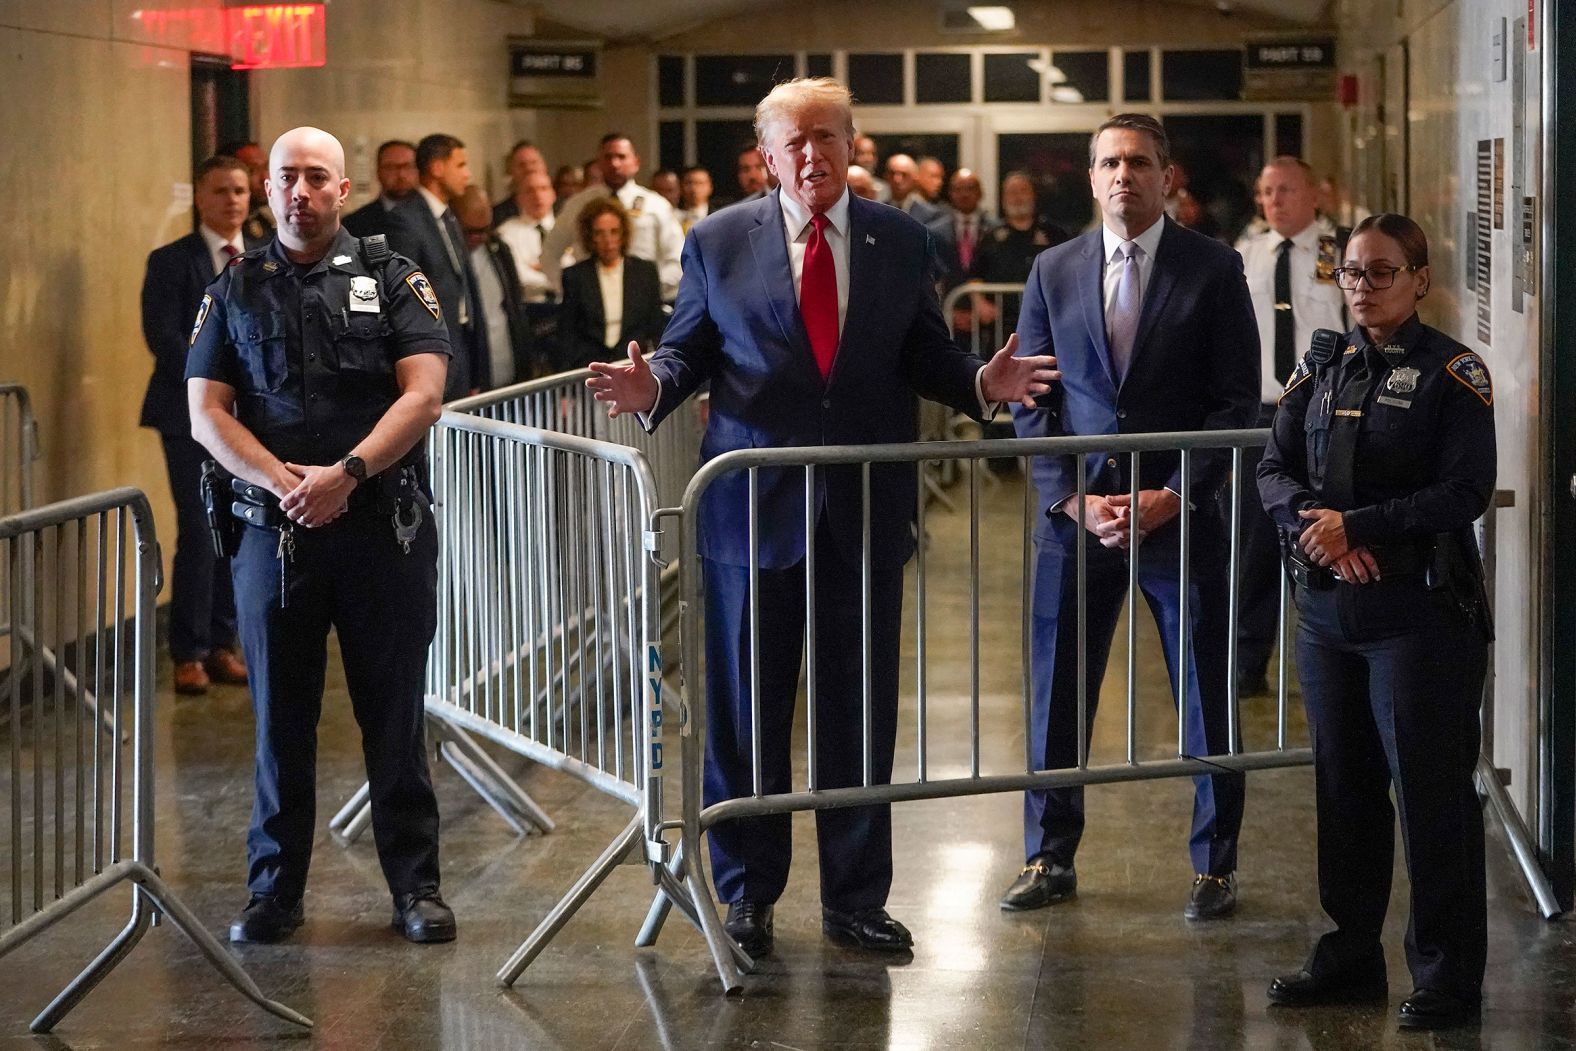 Trump speaks before entering the courtroom in New York on February 15. "This is not a crime," <a href="index.php?page=&url=https%3A%2F%2Fwww.cnn.com%2Fpolitics%2Flive-news%2Ftrump-hearings-ny-georgia%2Fh_4e1d4ddd01b2853ca32b0036f2ca9ead" target="_blank">he told reporters in the courthouse hallway</a>. He added that he'd rather spend his time campaigning than in courtrooms: "We want delays, obviously I'm running for election."